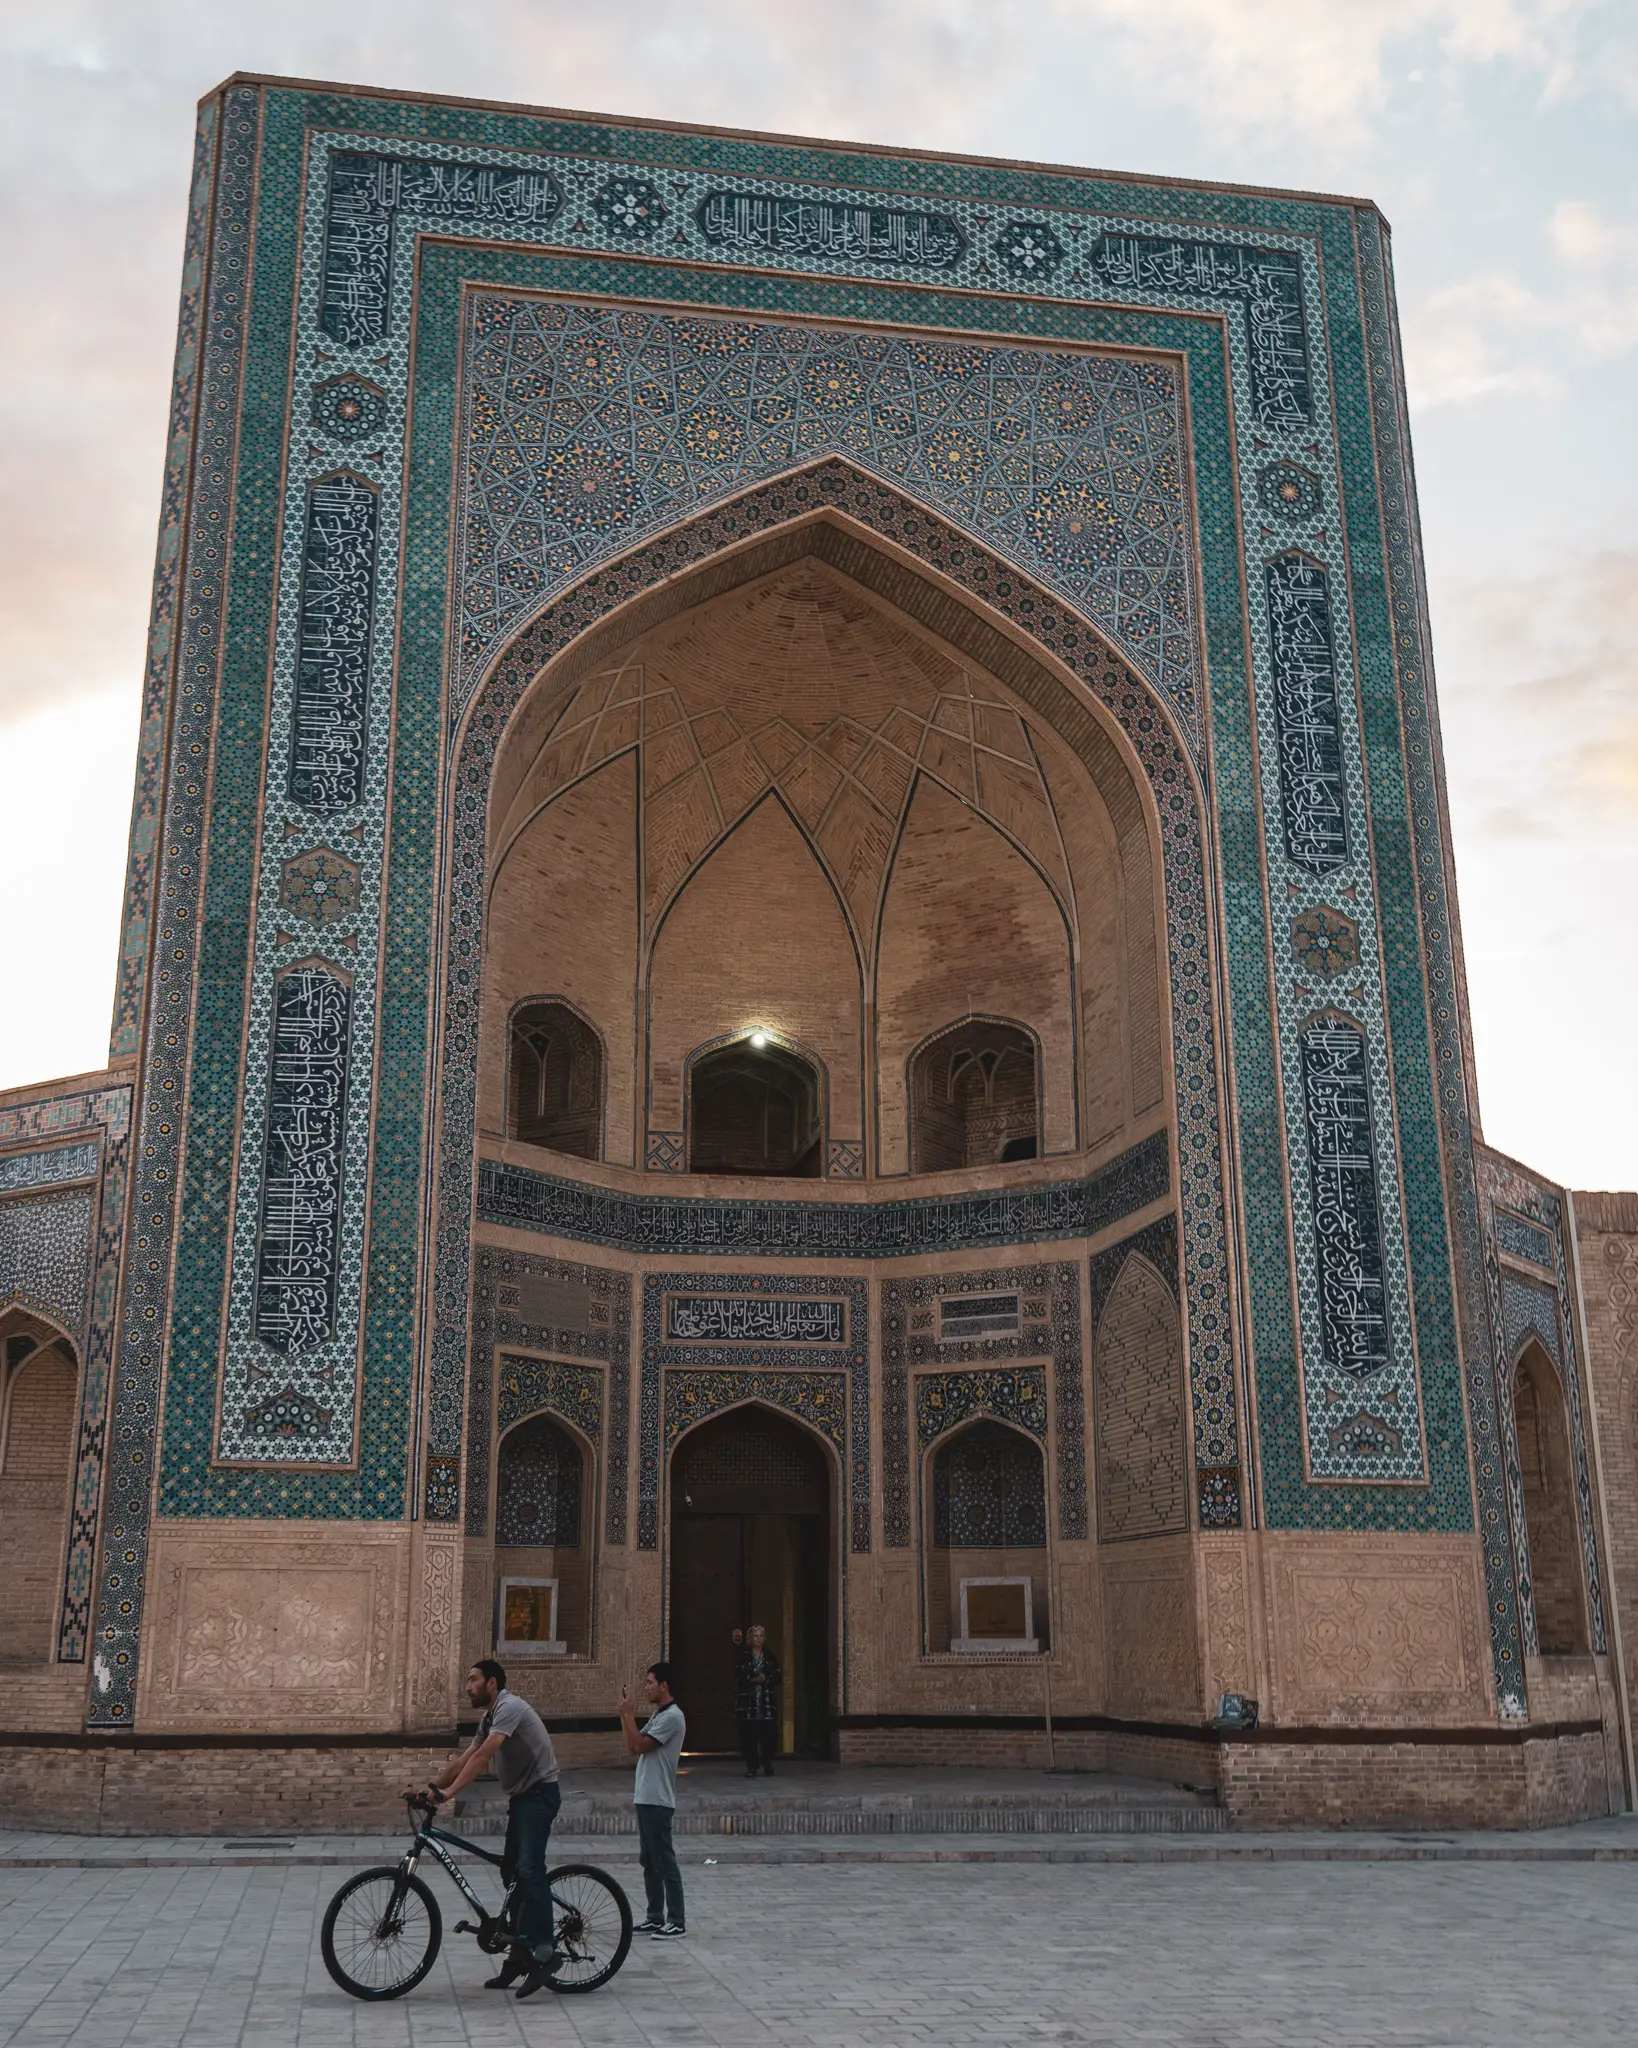 Waking up at sunrise for views like this in Uzbekistan? Free!